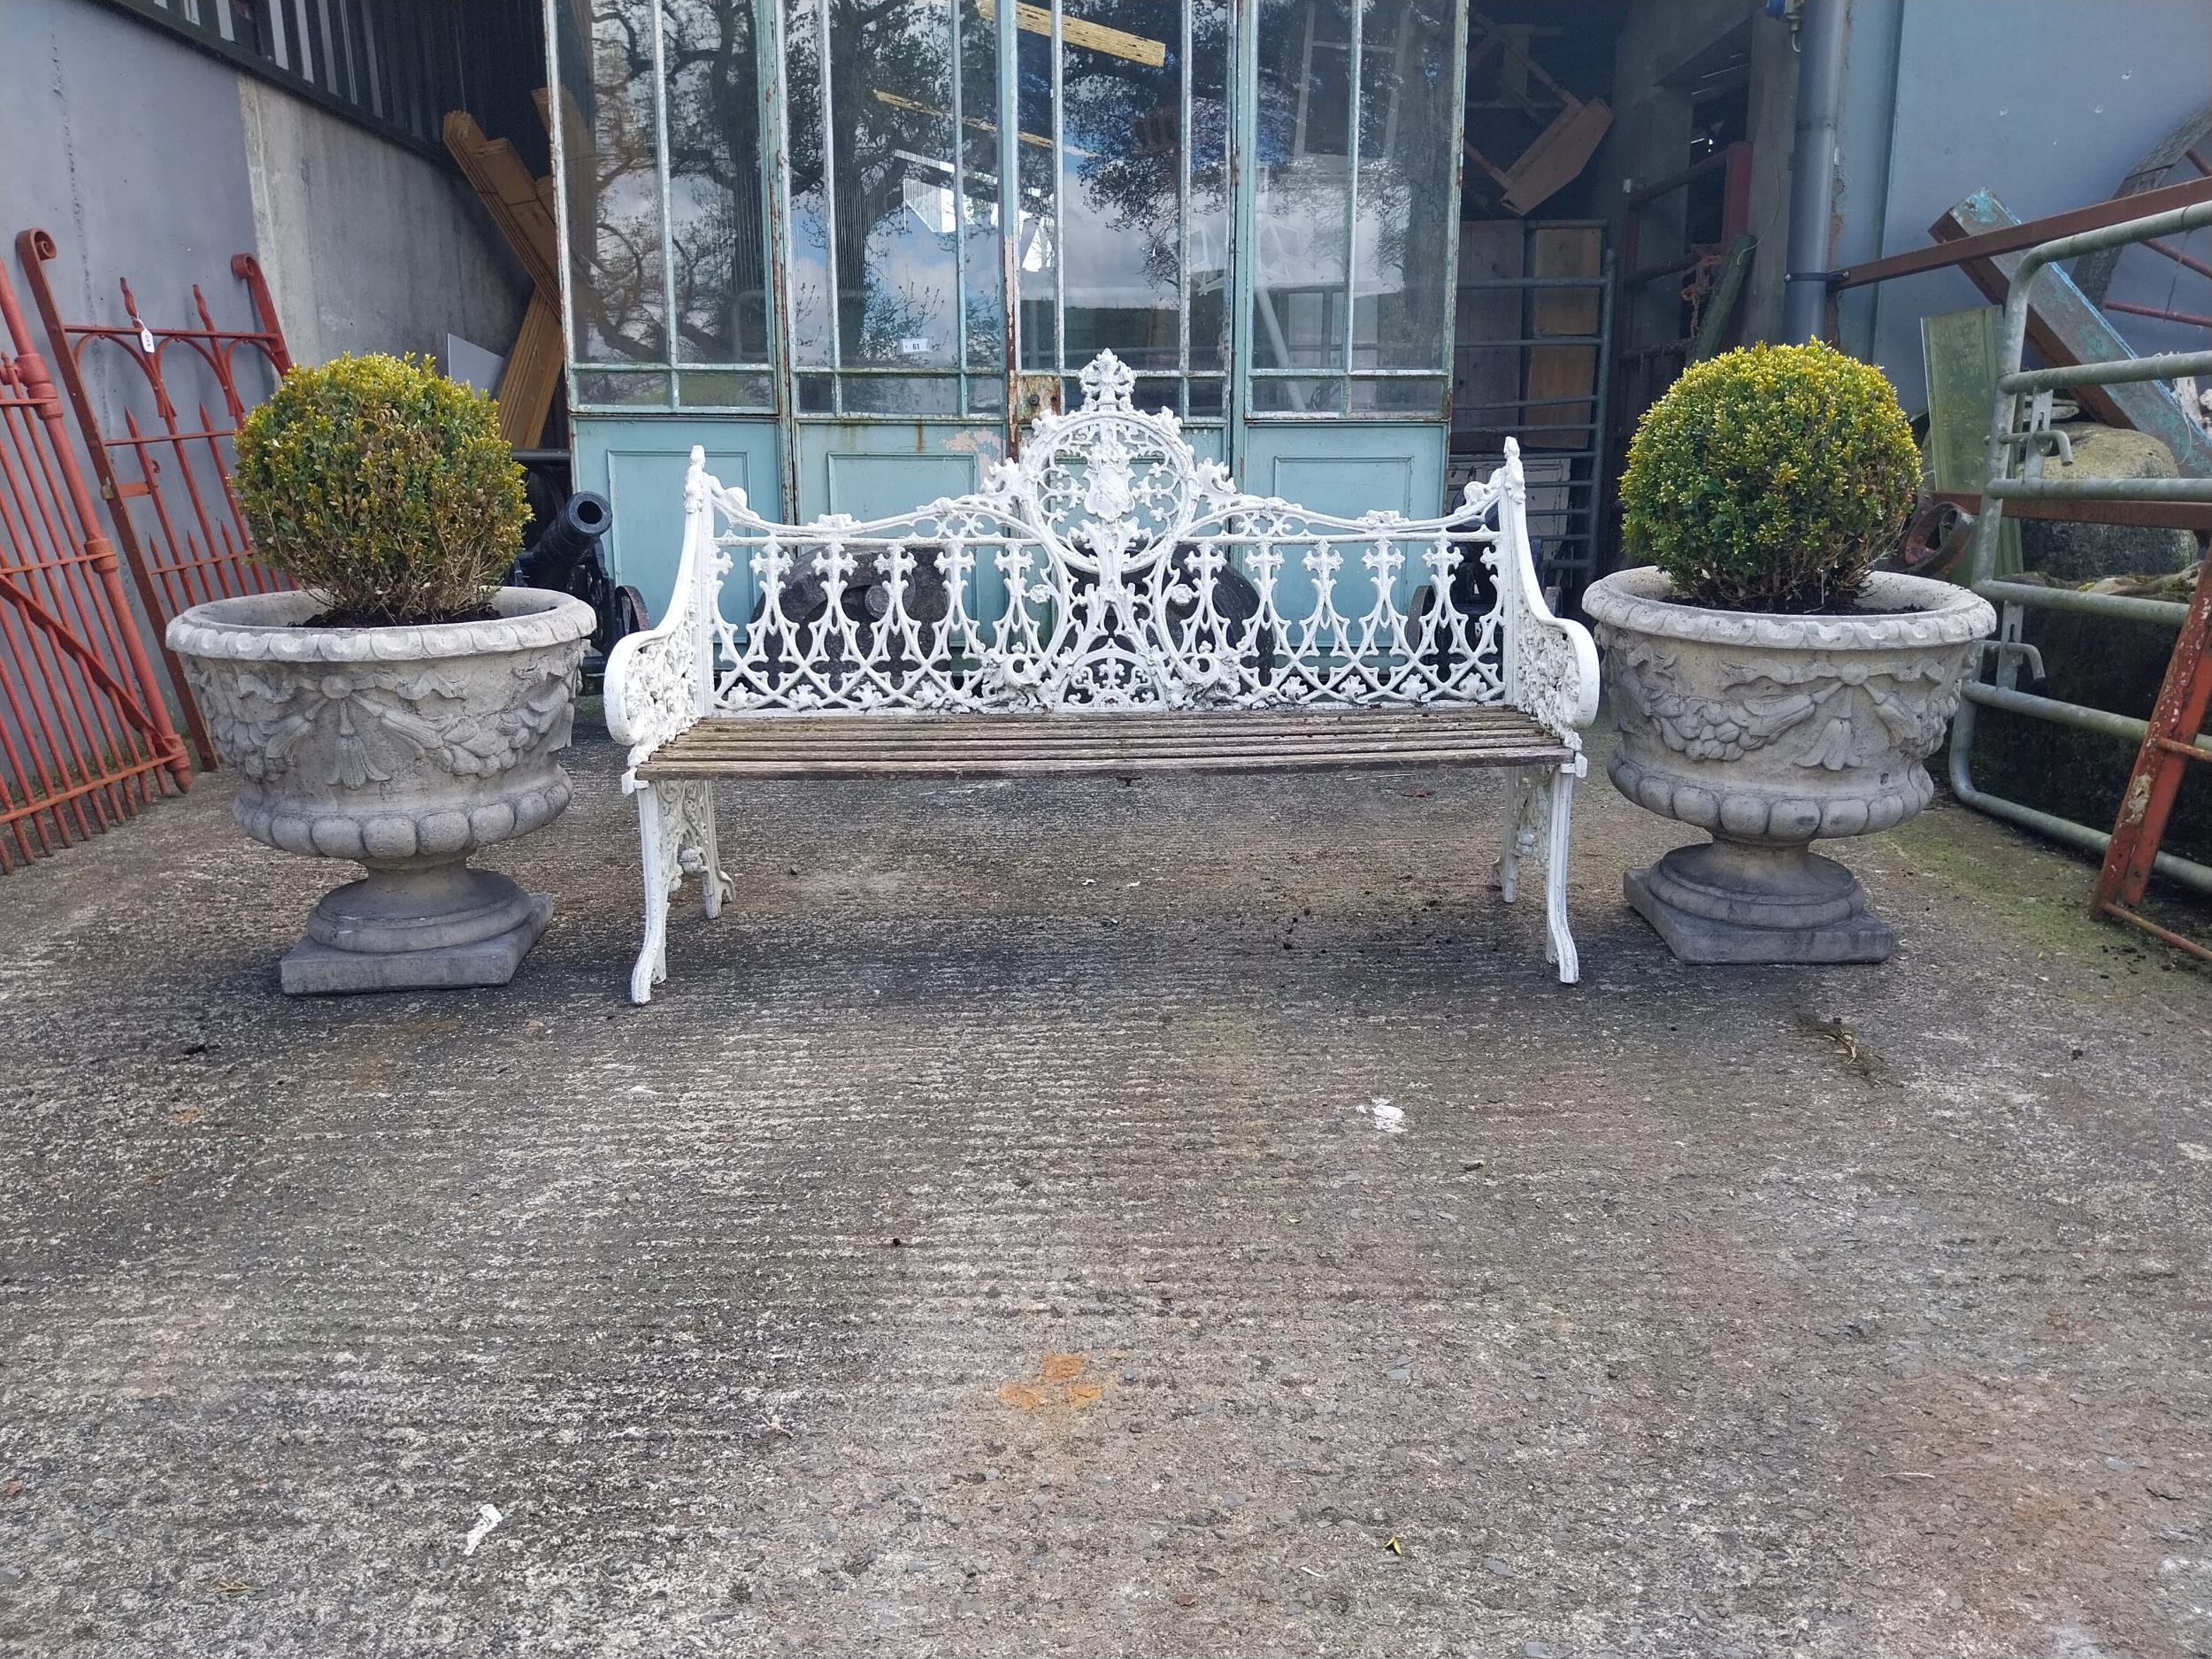 Decorative cast alloy garden bench in the Victorian style {99 cm H x 150 cm W x 68 cm D}. - Image 7 of 8